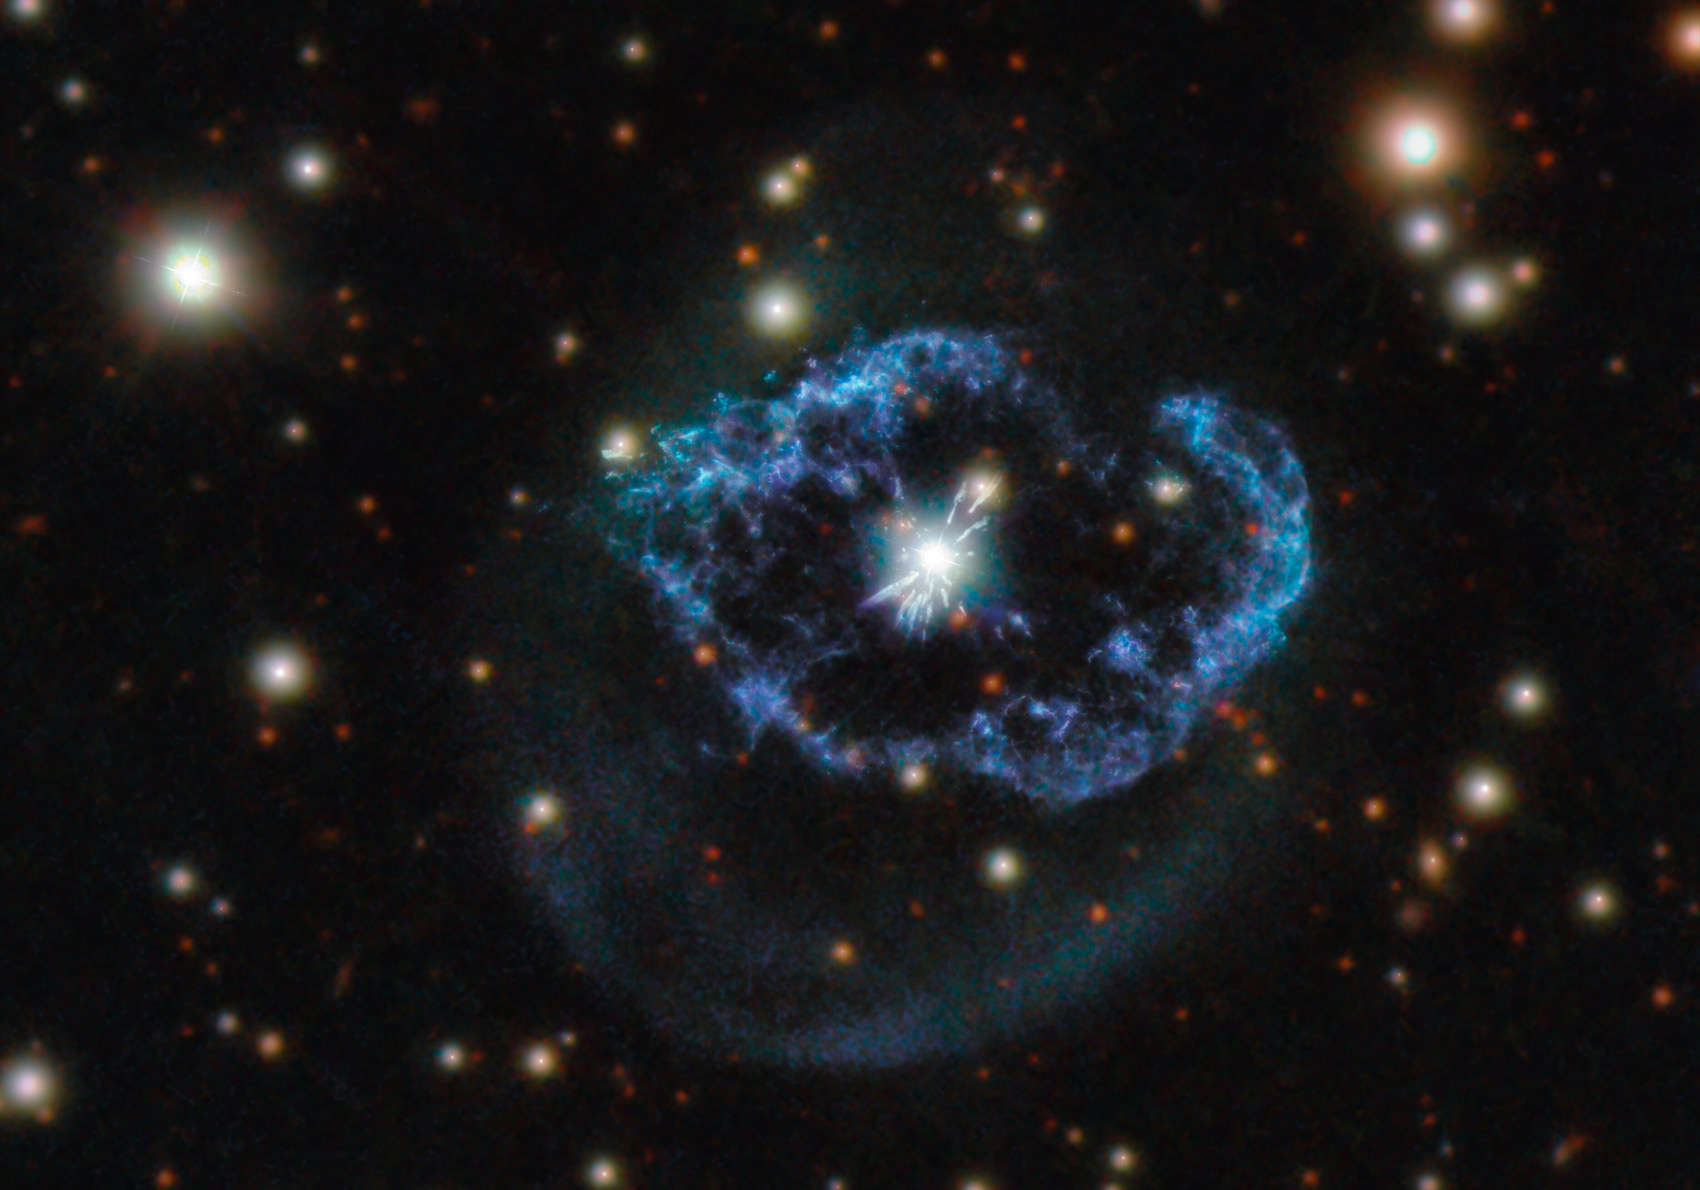 Hubble image of Abell 78, a dying star that cast of its outer layers to form a planetary nebula. It underwent a late pulse of energy, sending blobs of gas outward at high speeds. Credit: ESA/Hubble & NASA, M. Guerrero. Acknowledgement: Judy Schmidt